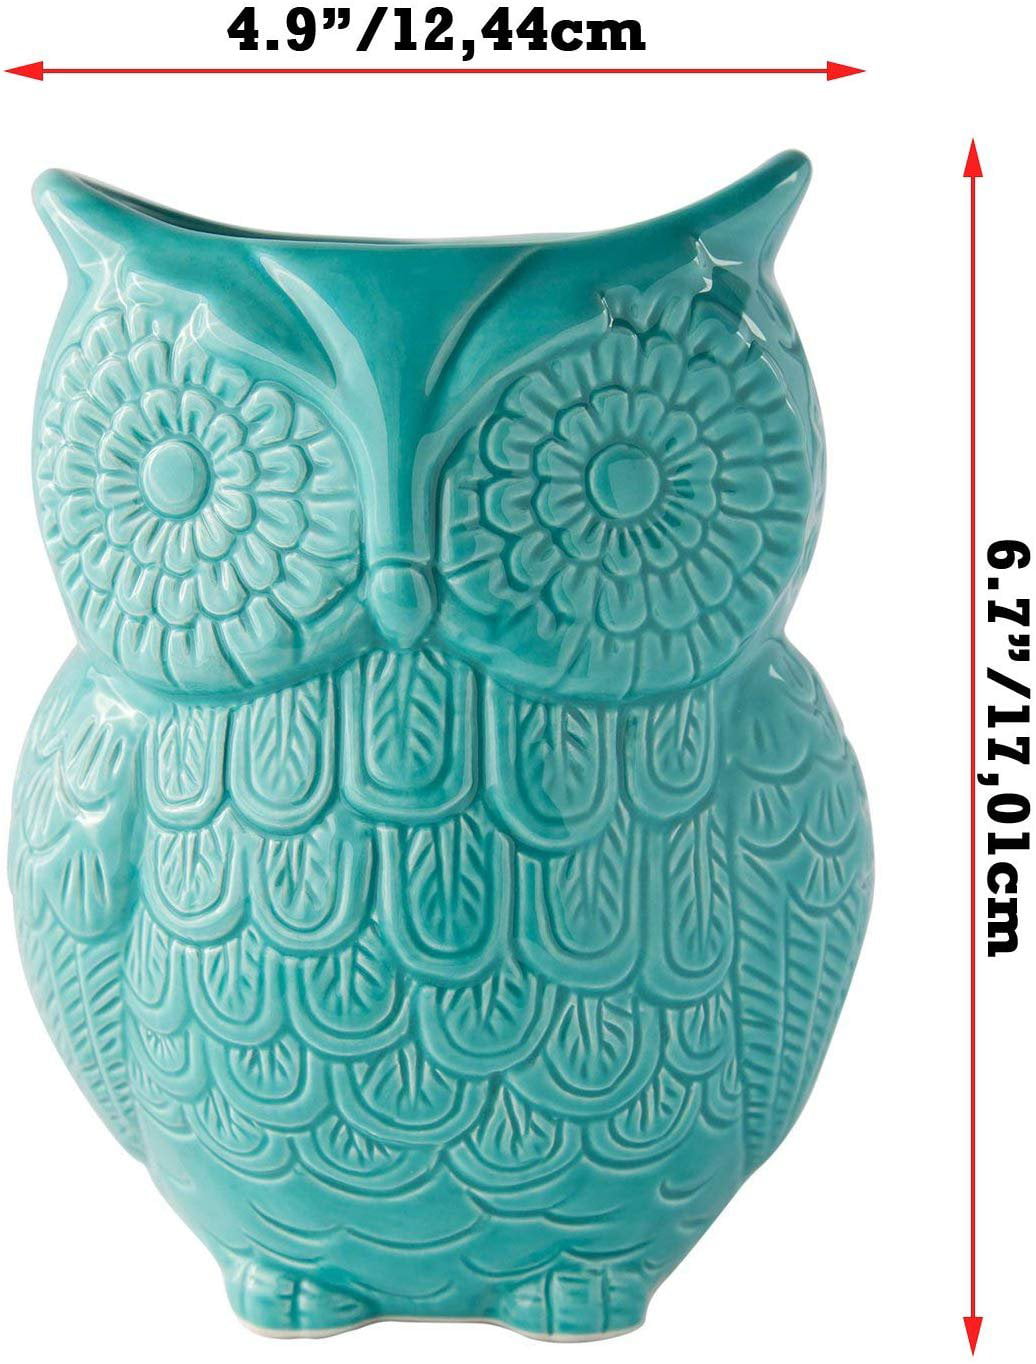 Comfify Owl Utensil Holder Decorative Ceramic Cookware Crock & Organizer in Lovely Aqua Blue Color 5” x 7” x 4” Size Utensil Caddy and Perfect Kitchen Ceramic Décor Gift 